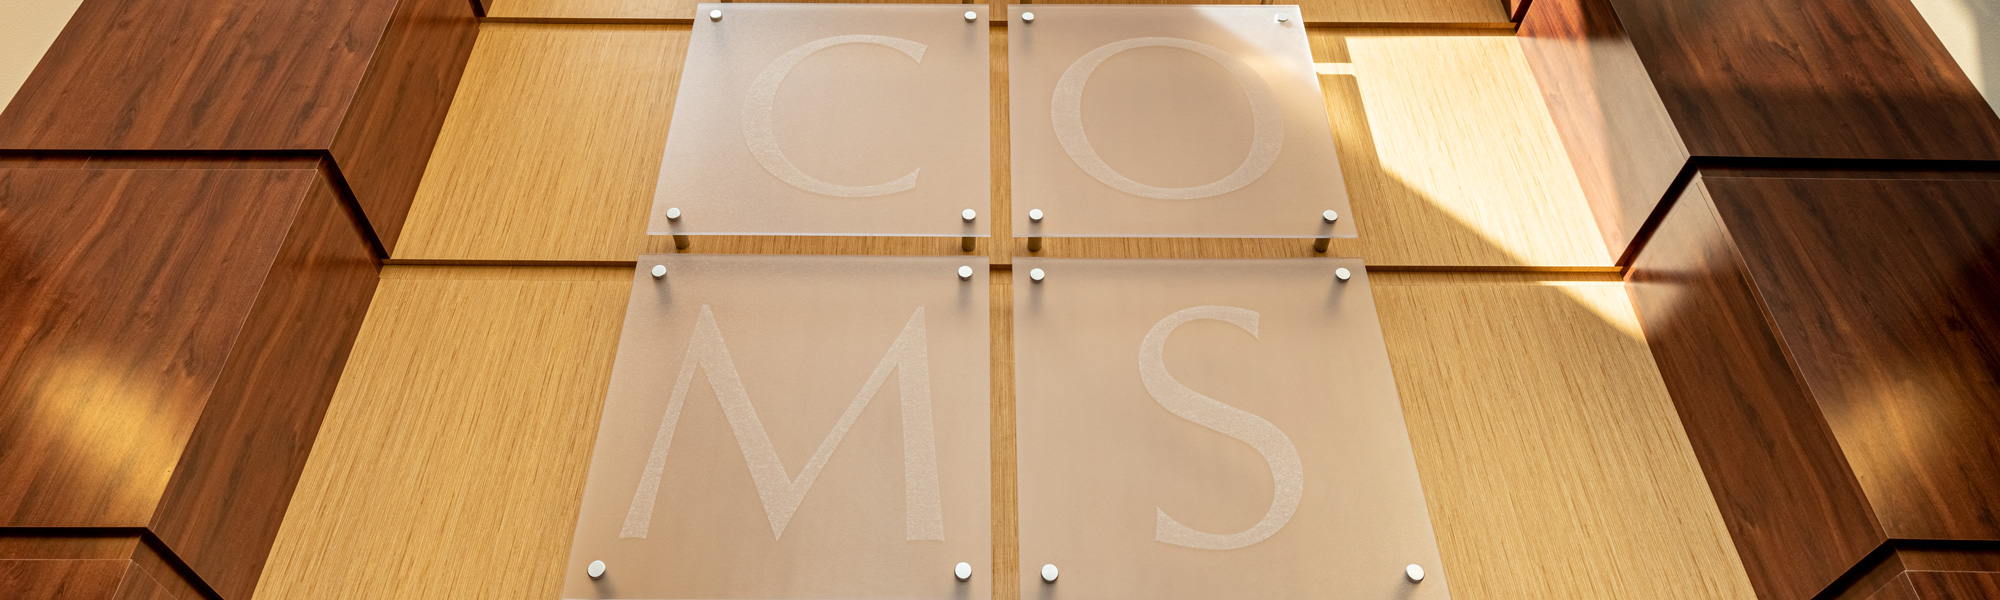 COMS entryway signage